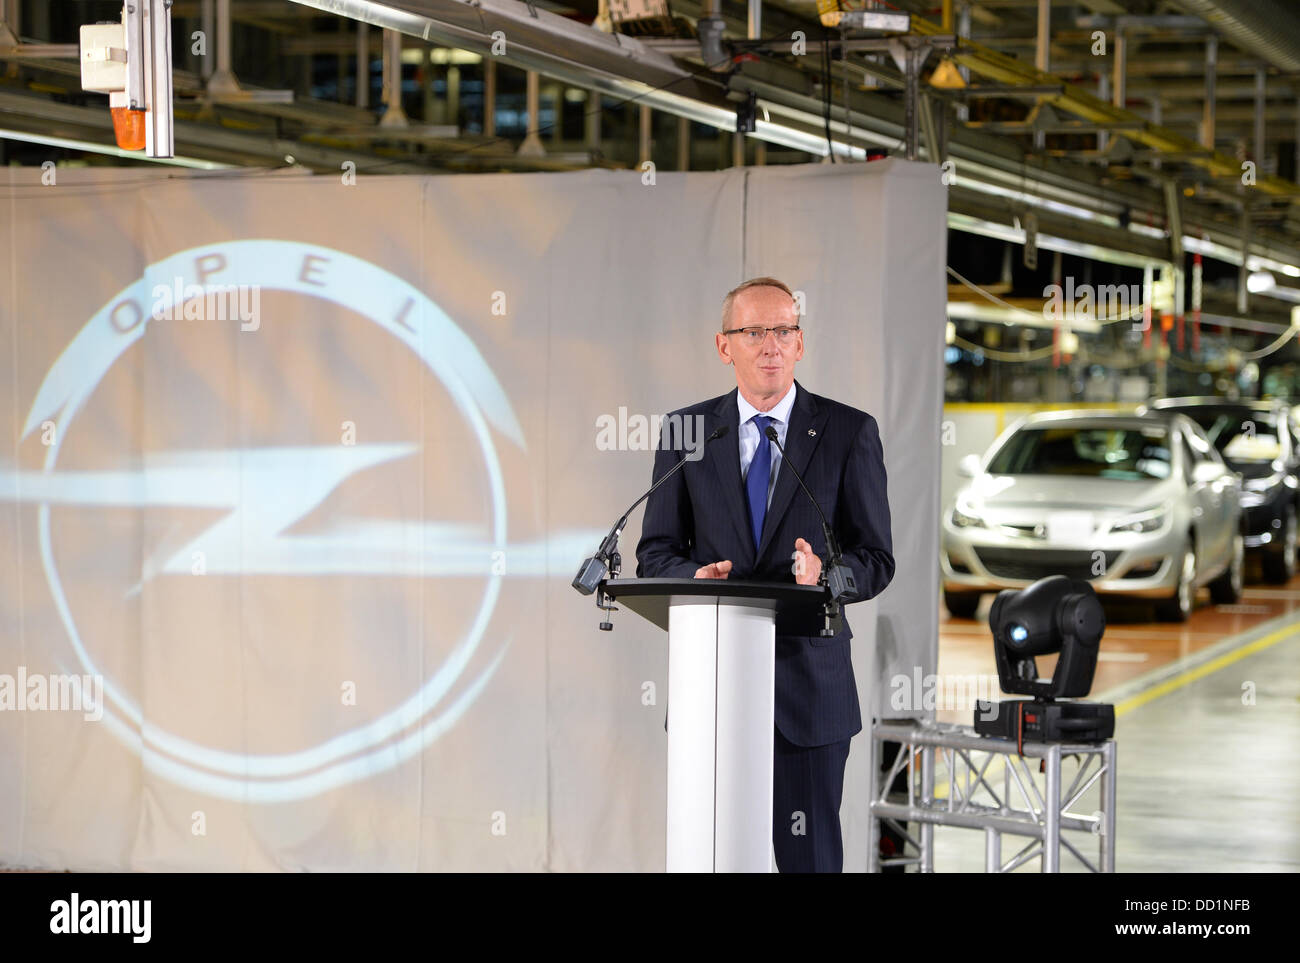 Ruesselsheim, Germany. 22nd Aug, 2013. Karl-Thomas Neumann, chairman of the Adam Opel AG, gives a speech during the presentation of the new Opel Insignia in the Opel parent plant in Ruesselsheim, Germany, 22 August 2013. The car builder overhauled its almost five-year-old flagship car. Photo: ARNE DEDERT/dpa/Alamy Live News Stock Photo